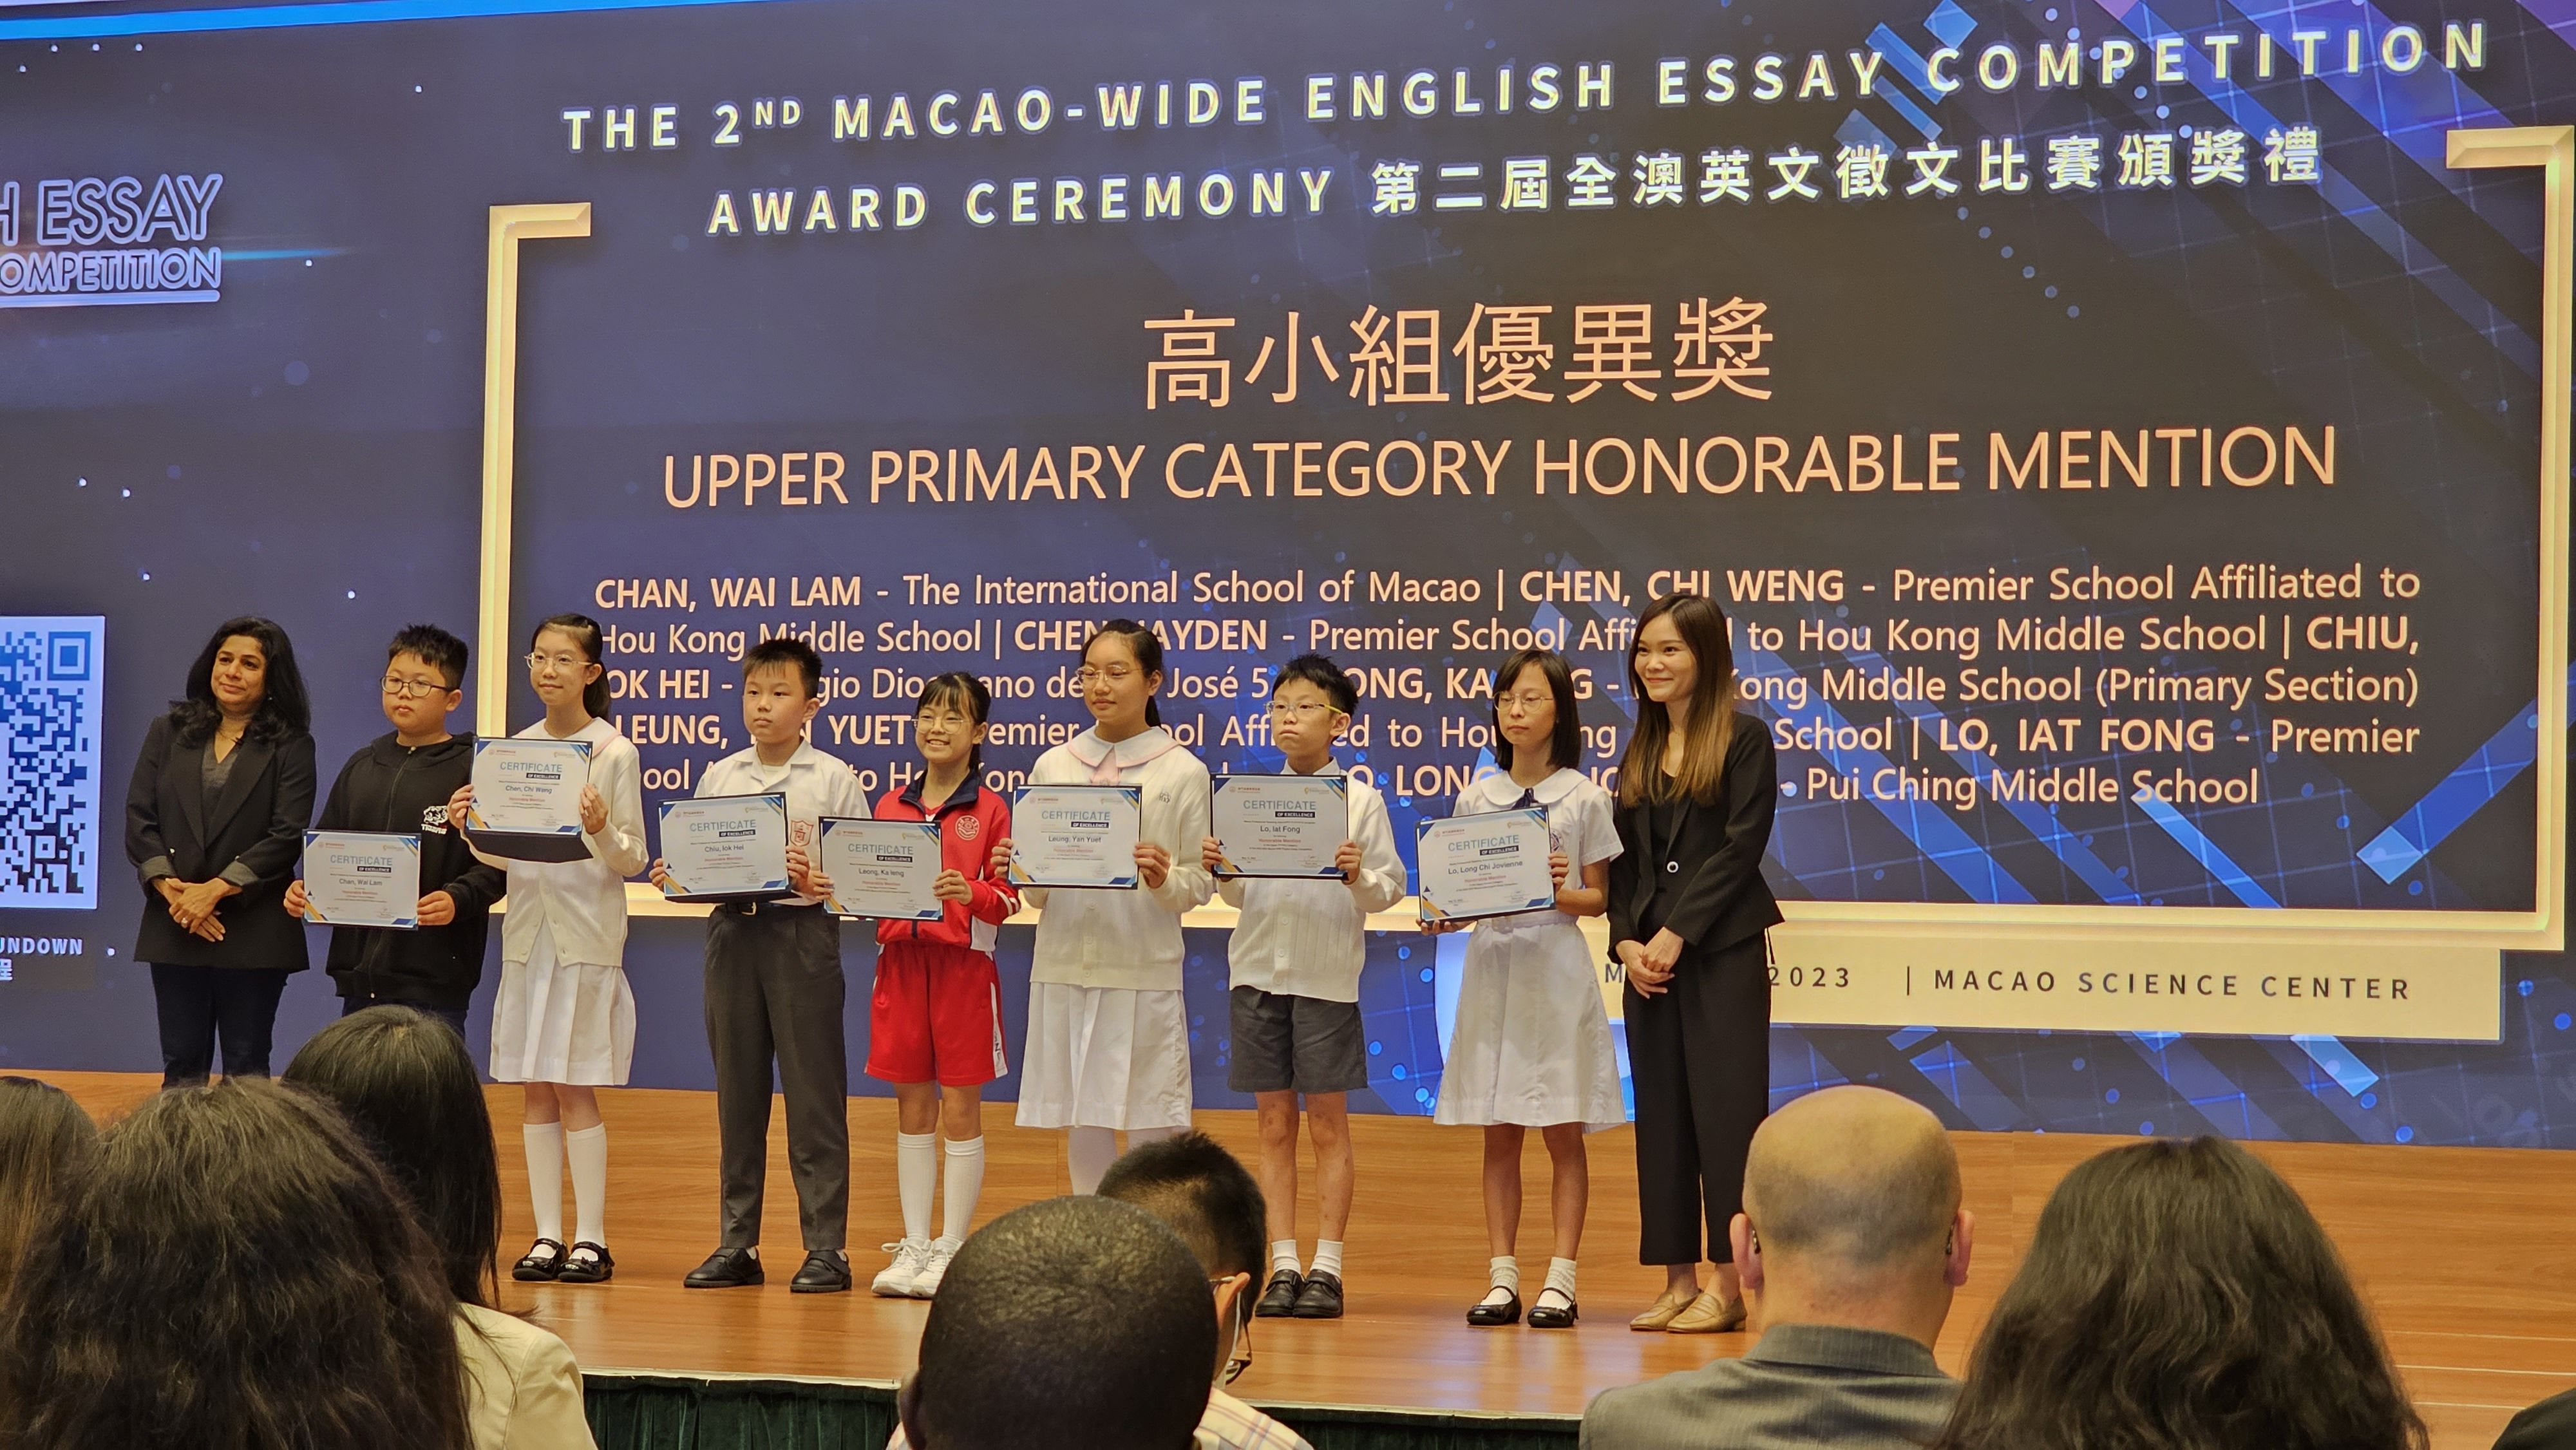 Discover the Global Goals – Macao-wide English Essay Competition